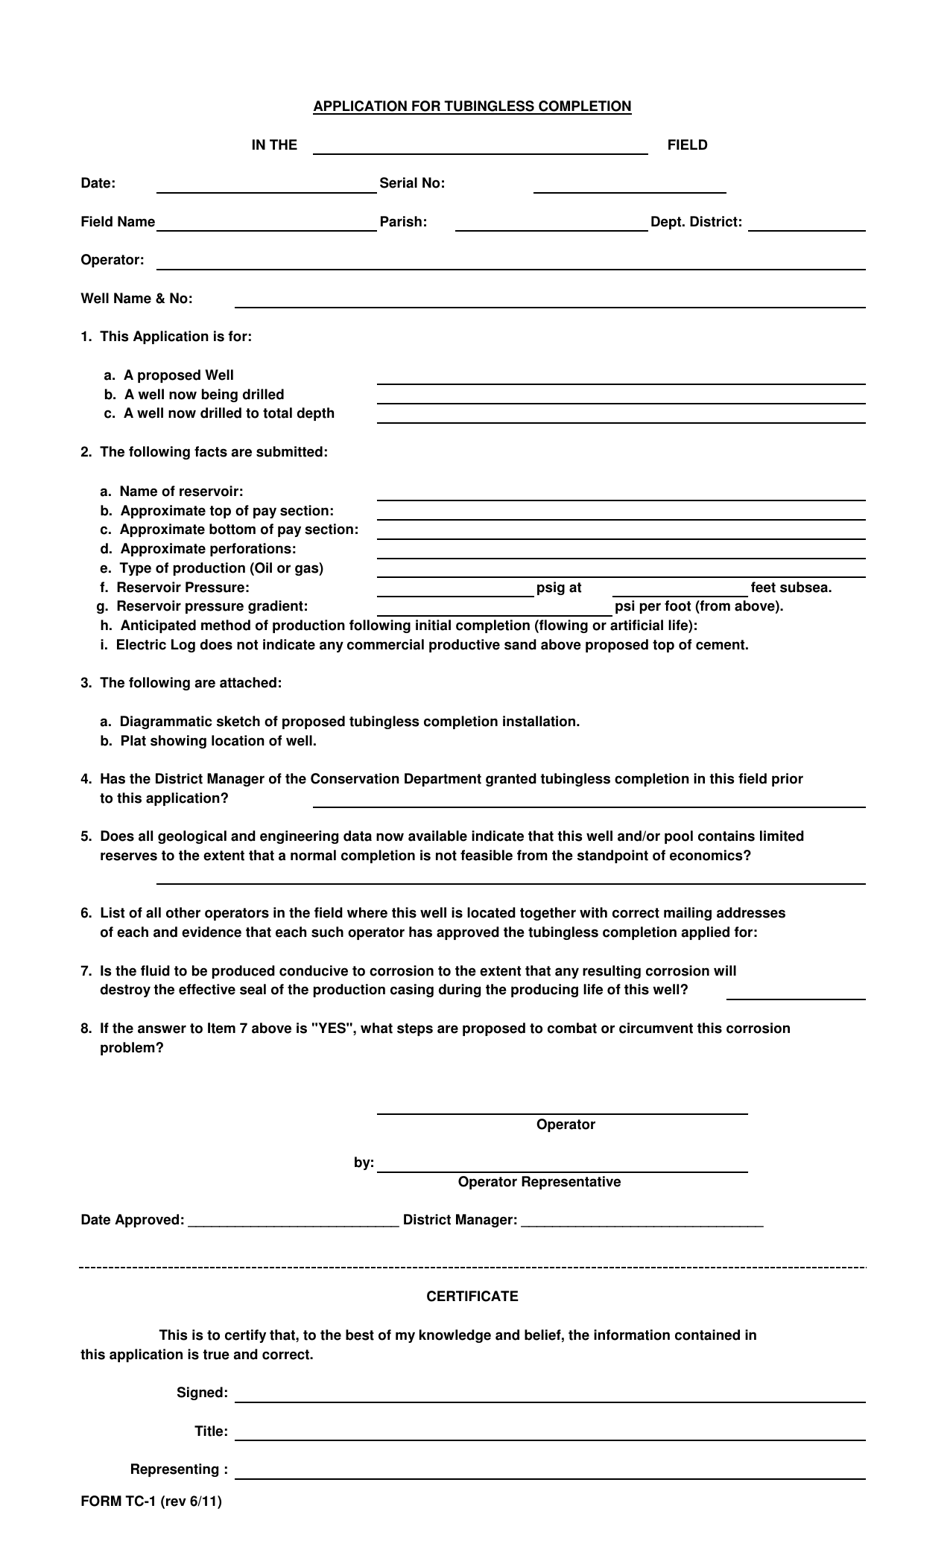 Form TC-1 Application for Tubingless Completion - Louisiana, Page 1